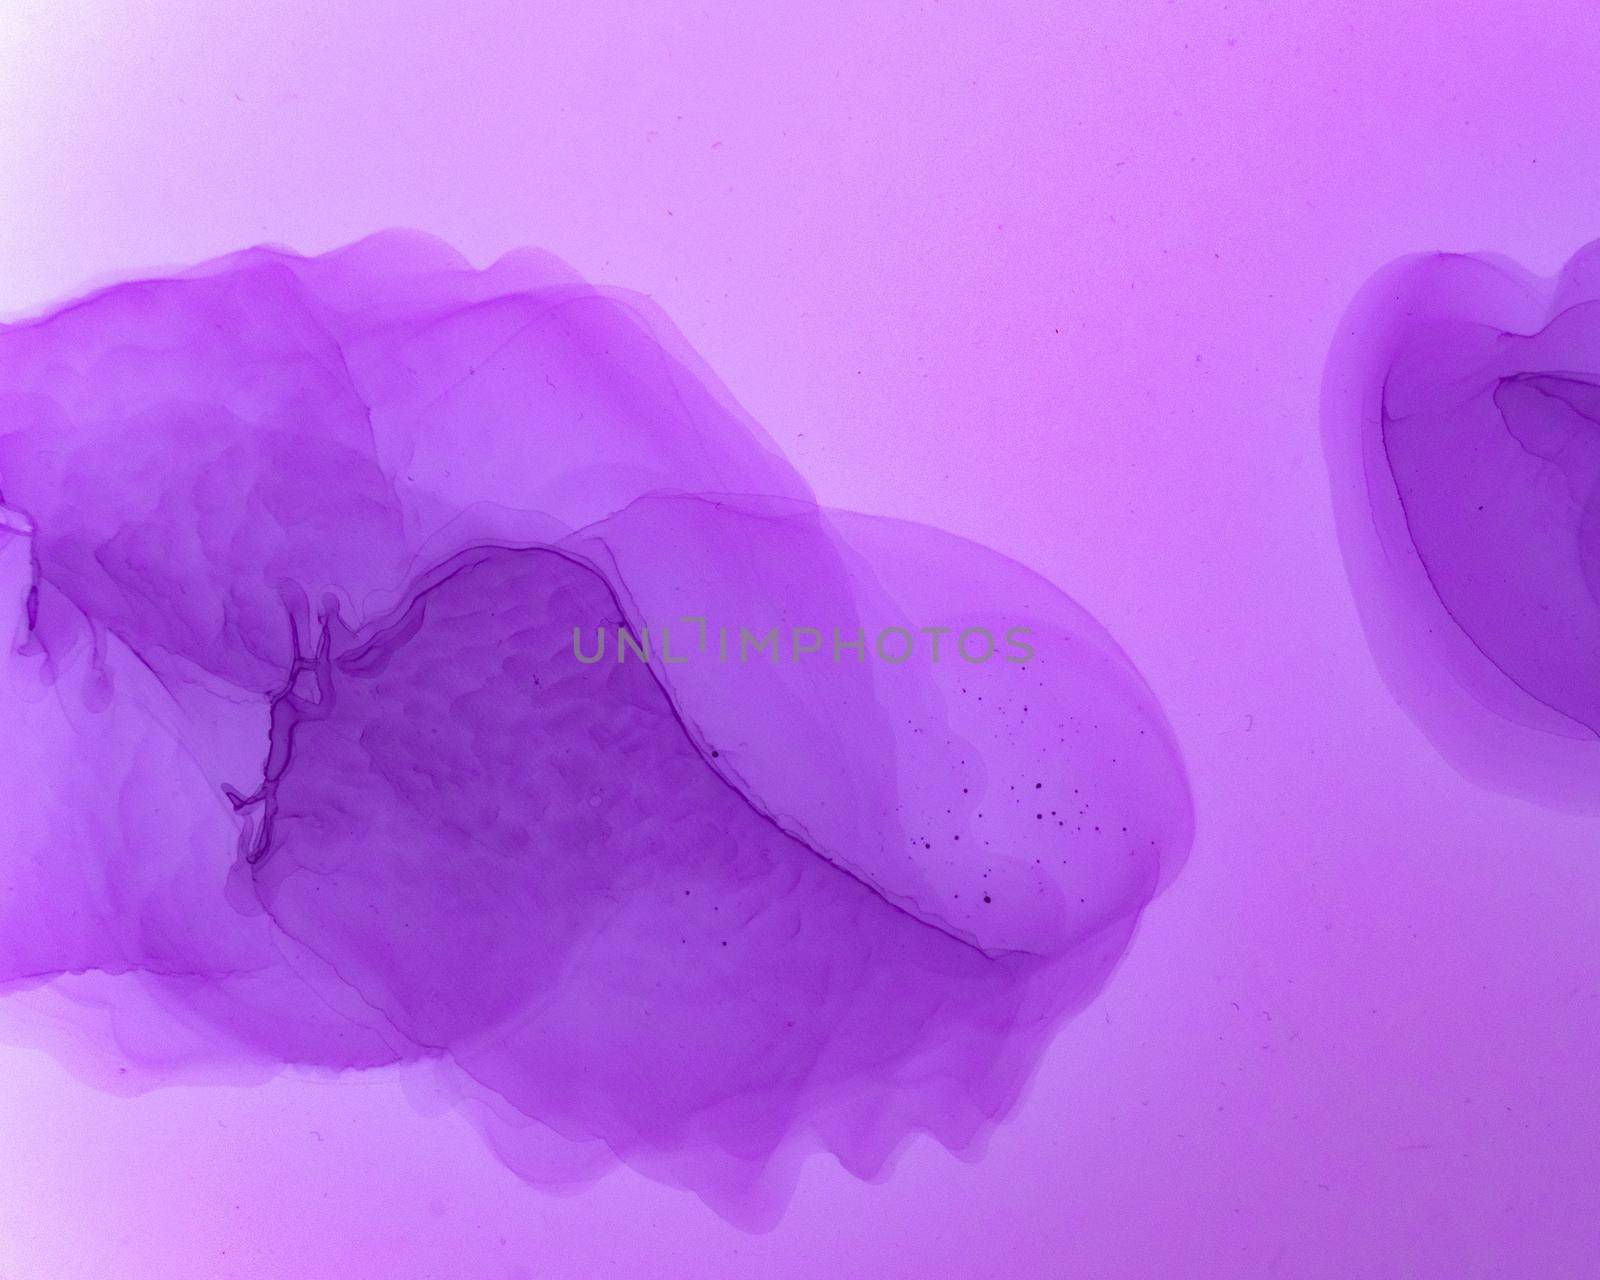 Ethereal Art Pattern. Alcohol Ink Wave Background. Mauve Abstract Drop Splash. Sophisticated Flow Effect. Ethereal Water Pattern. Liquid Ink Wave Background. Lilac Ethereal Paint Pattern.